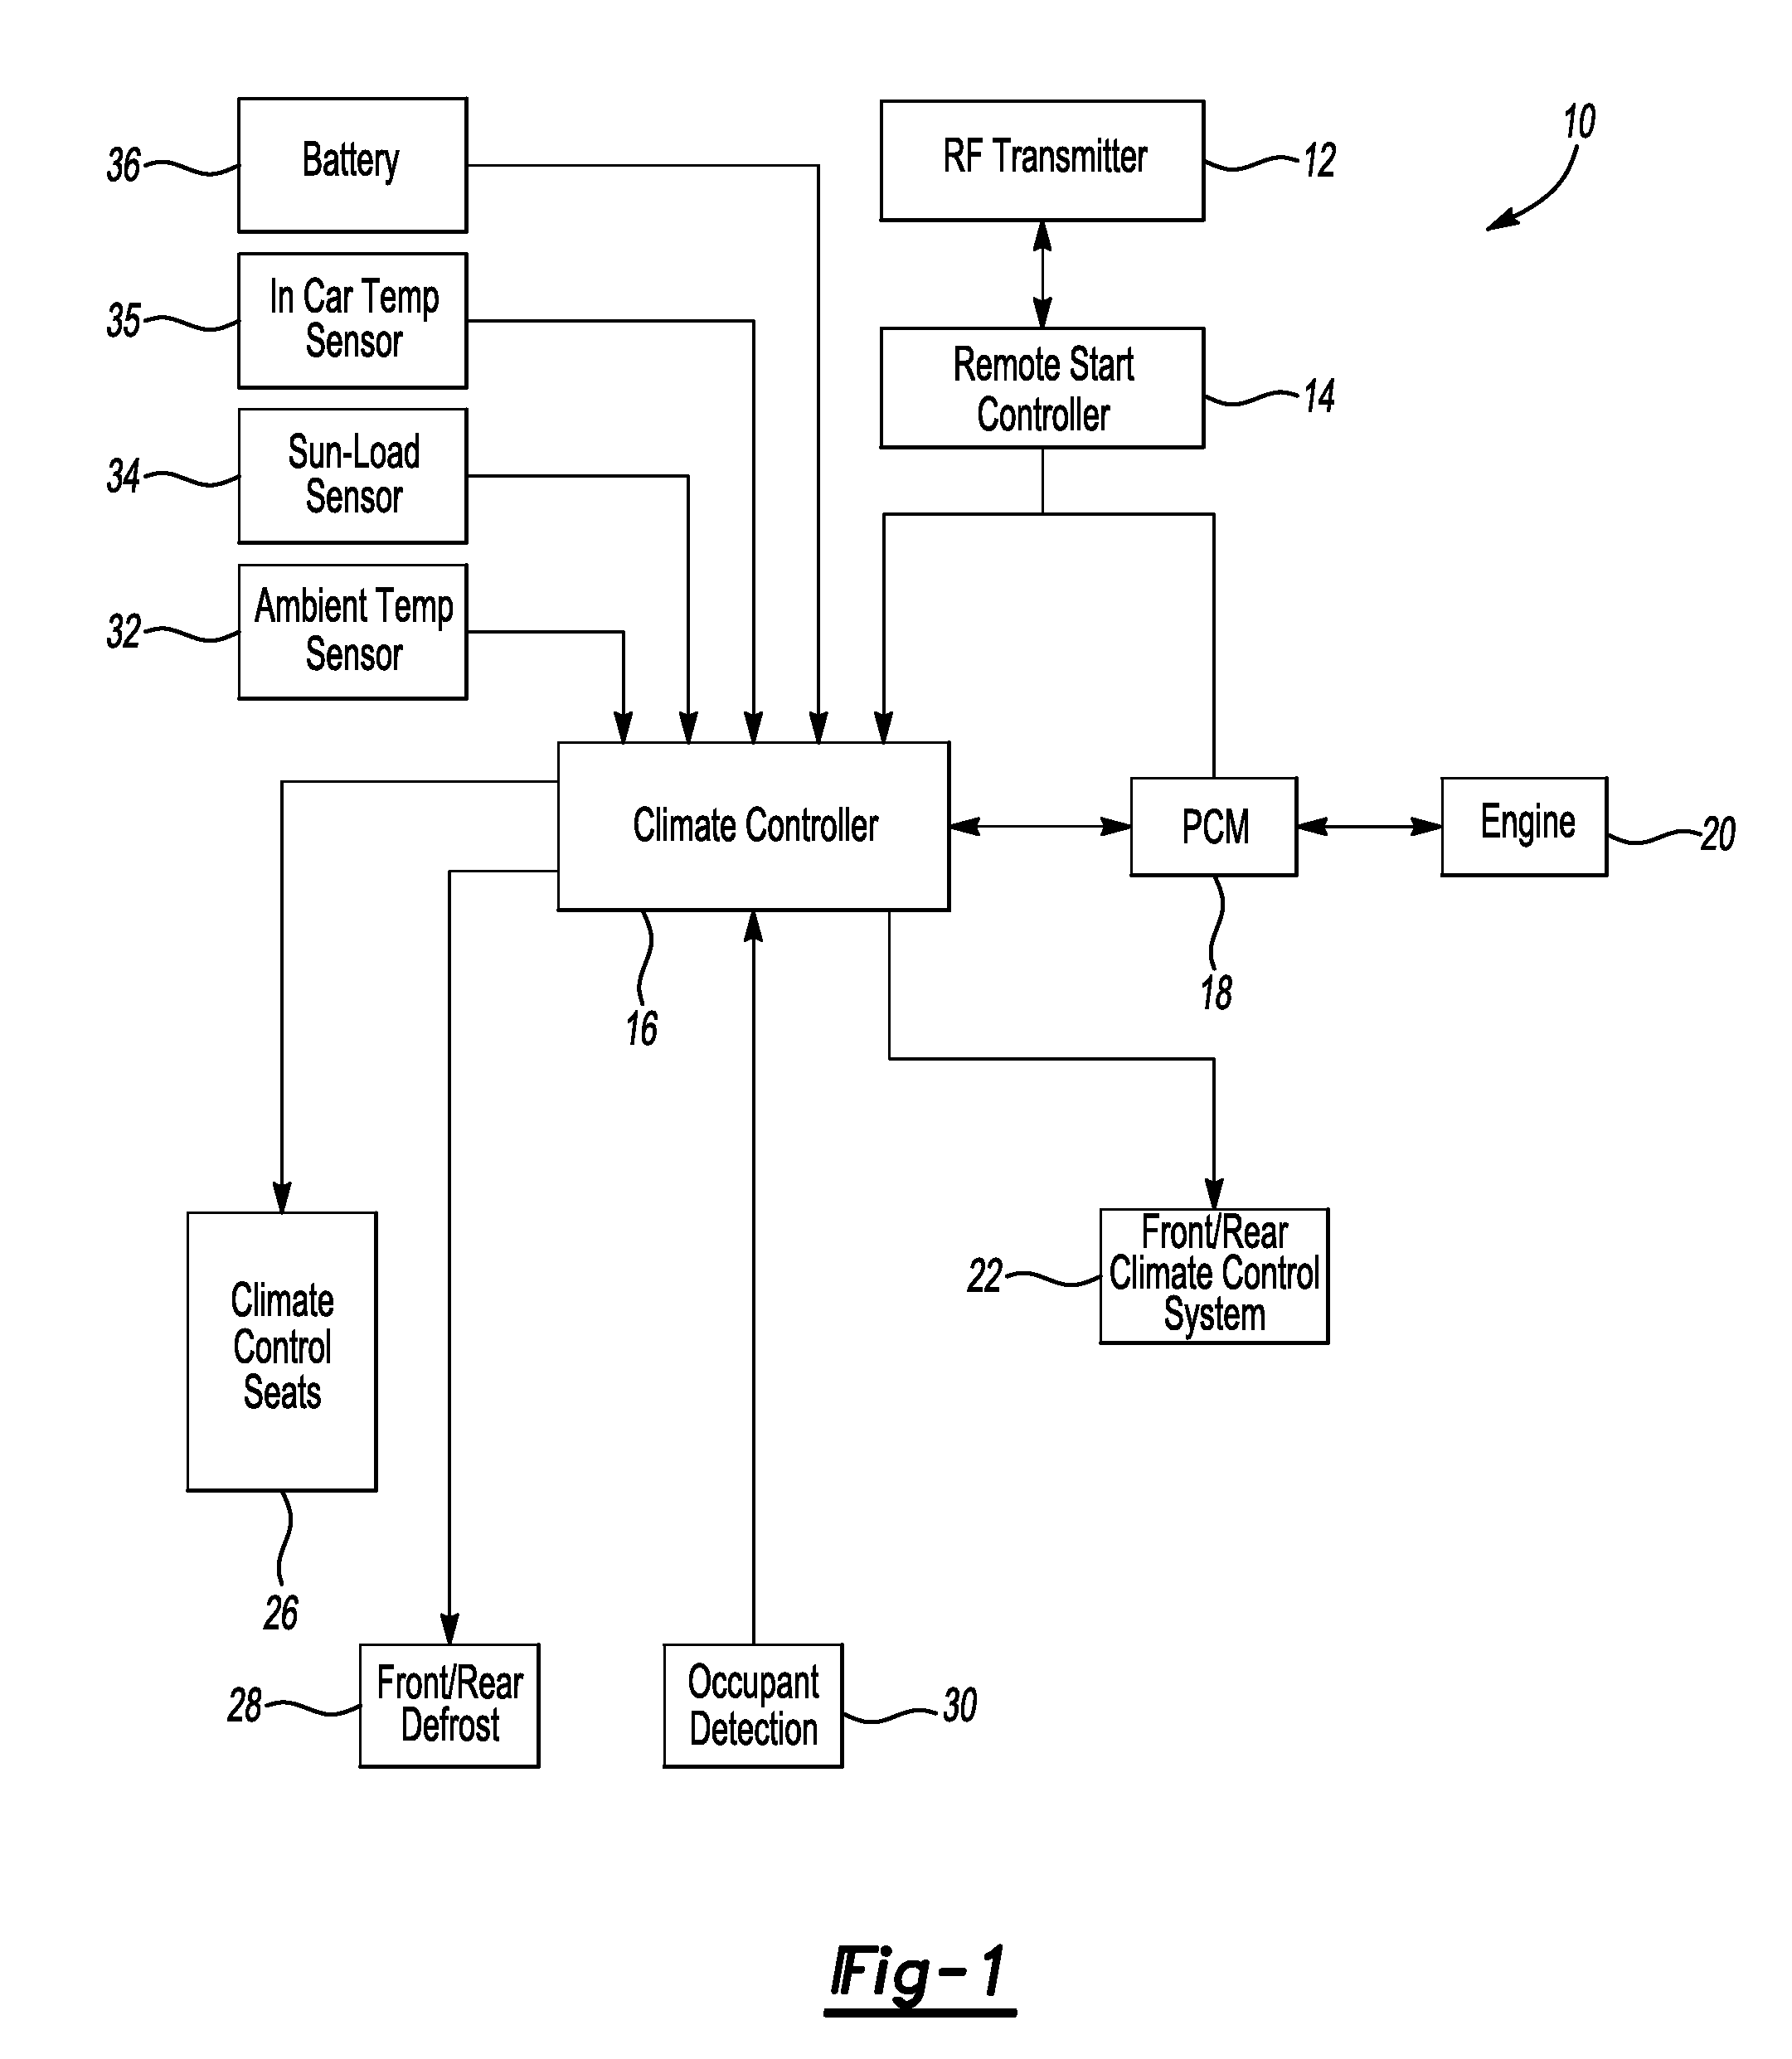 System and method for controlling a climate control system with remote start operation